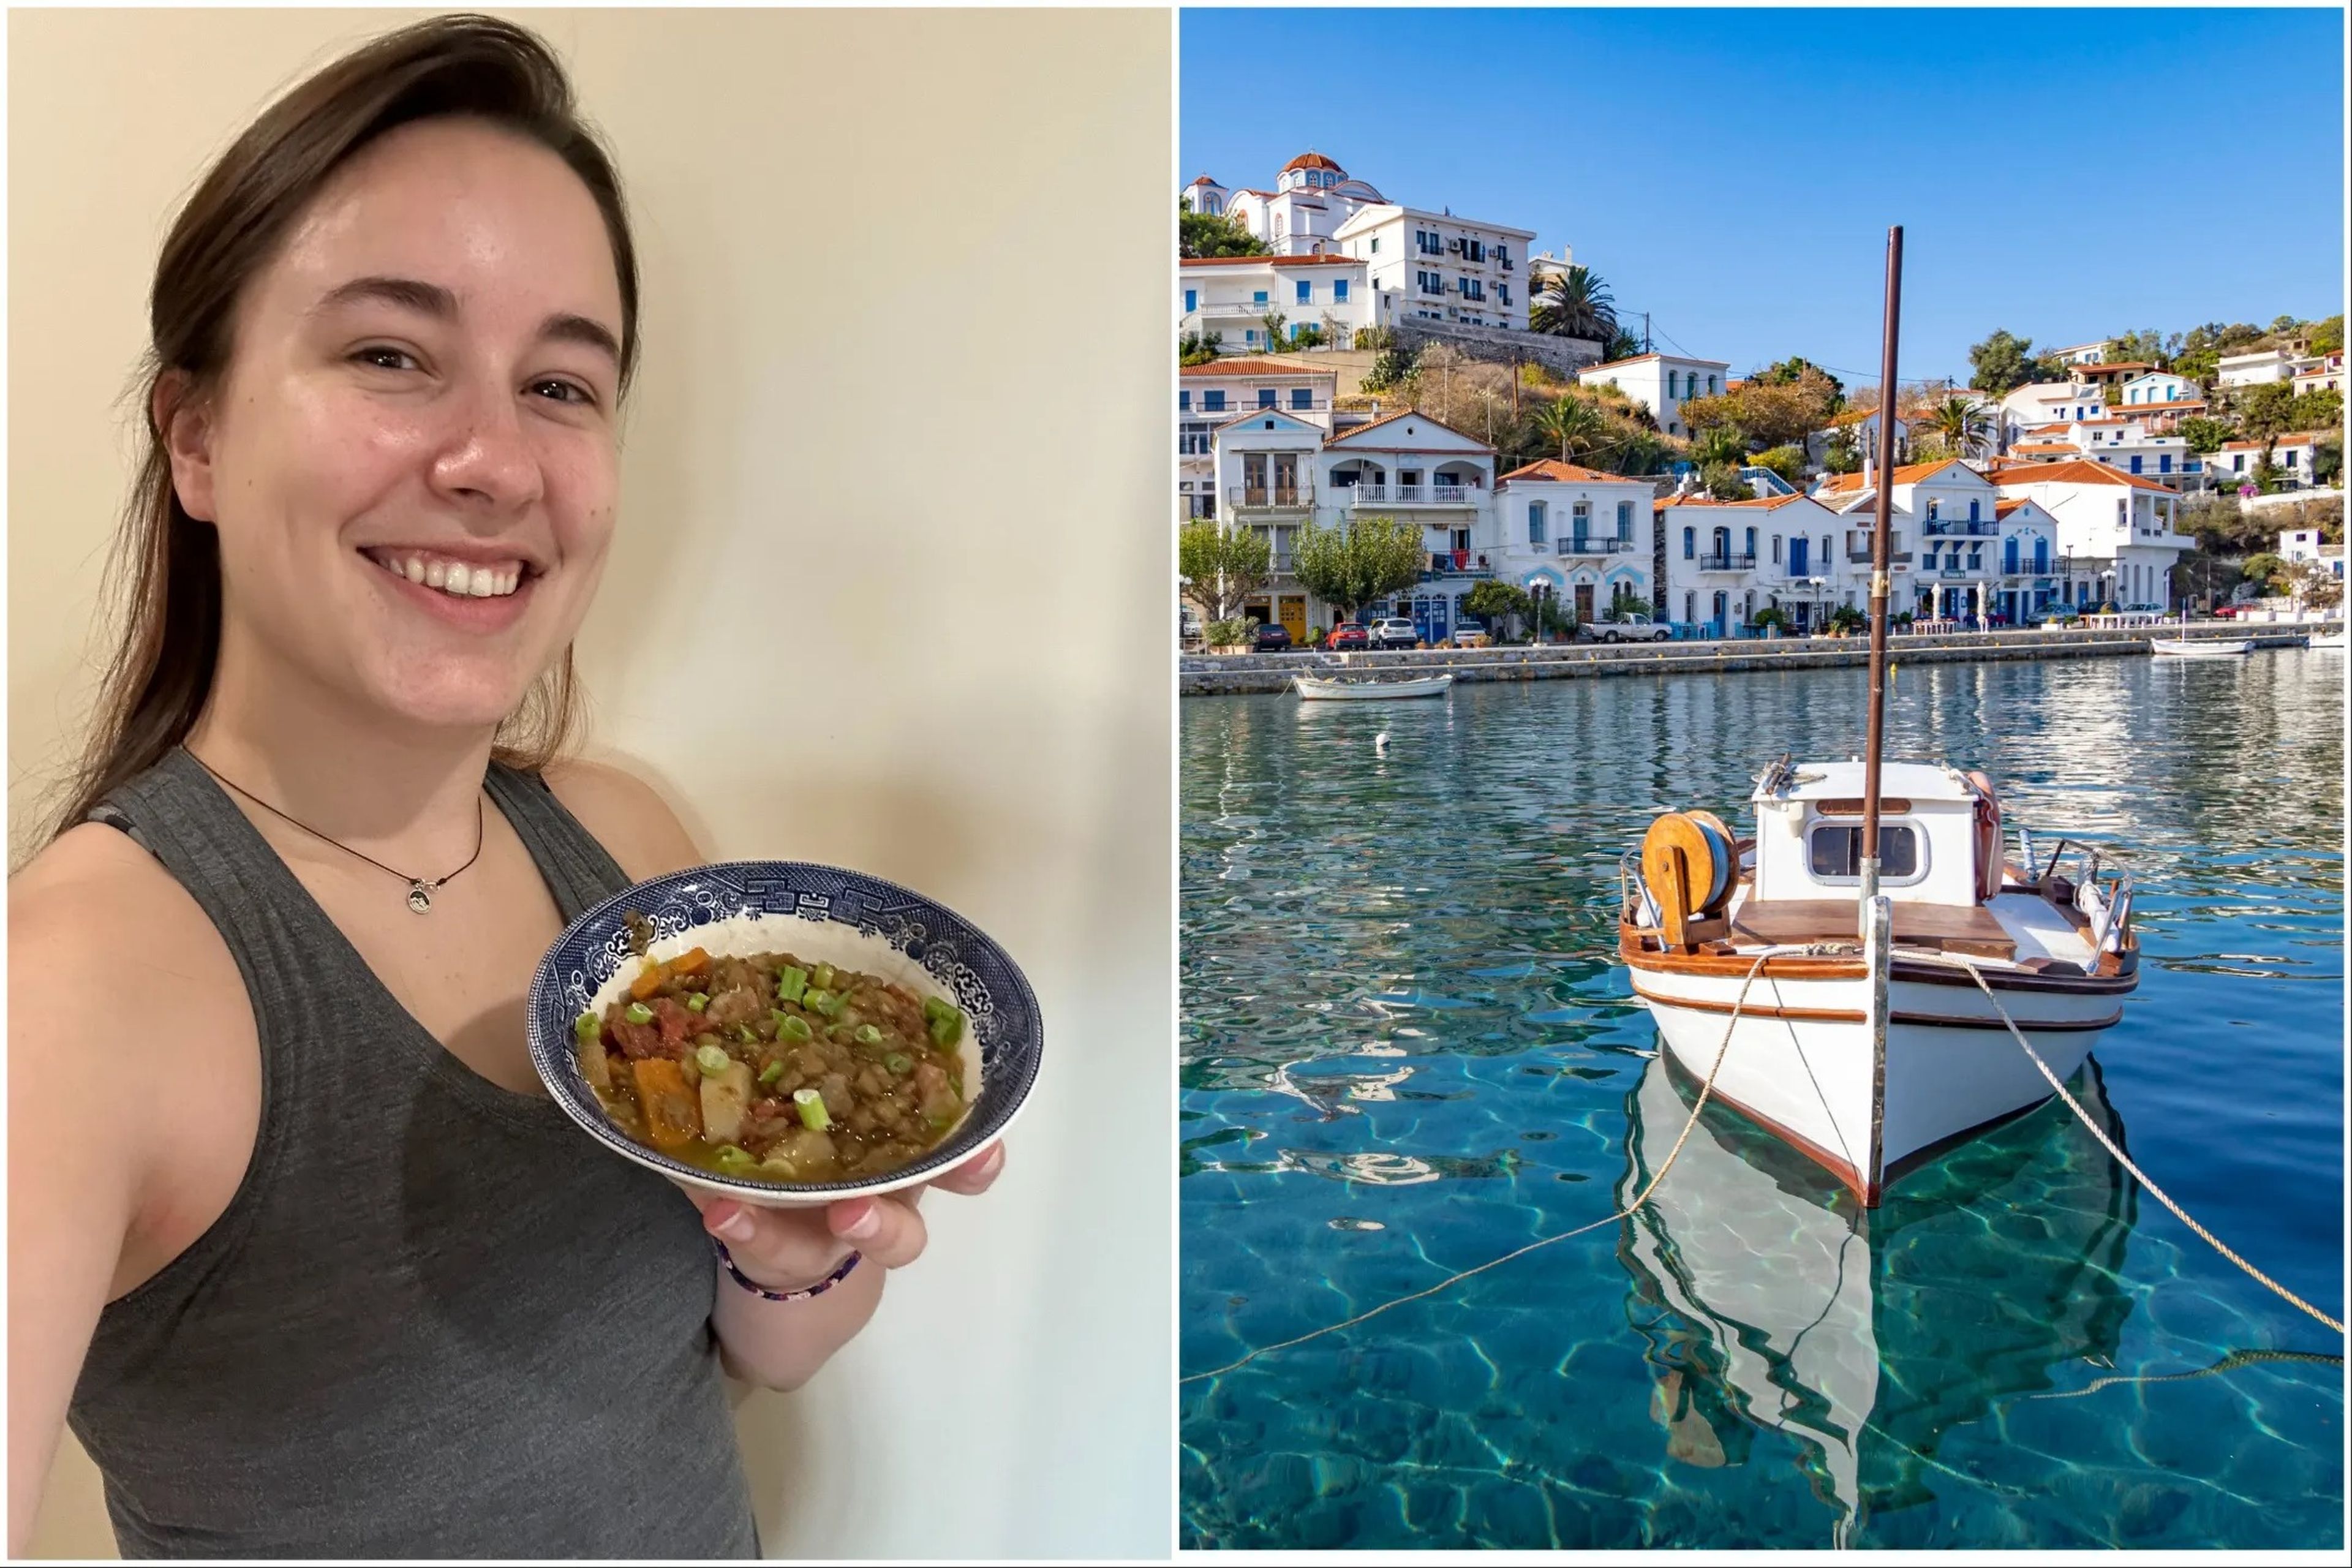 Author Kate Hull (left) is wearing a grey tank top and is holding a bowl of Blue Zones lentil soup she made. A white boat floats on clear water in Ikaria, Greece (right), white buildings are in the background.